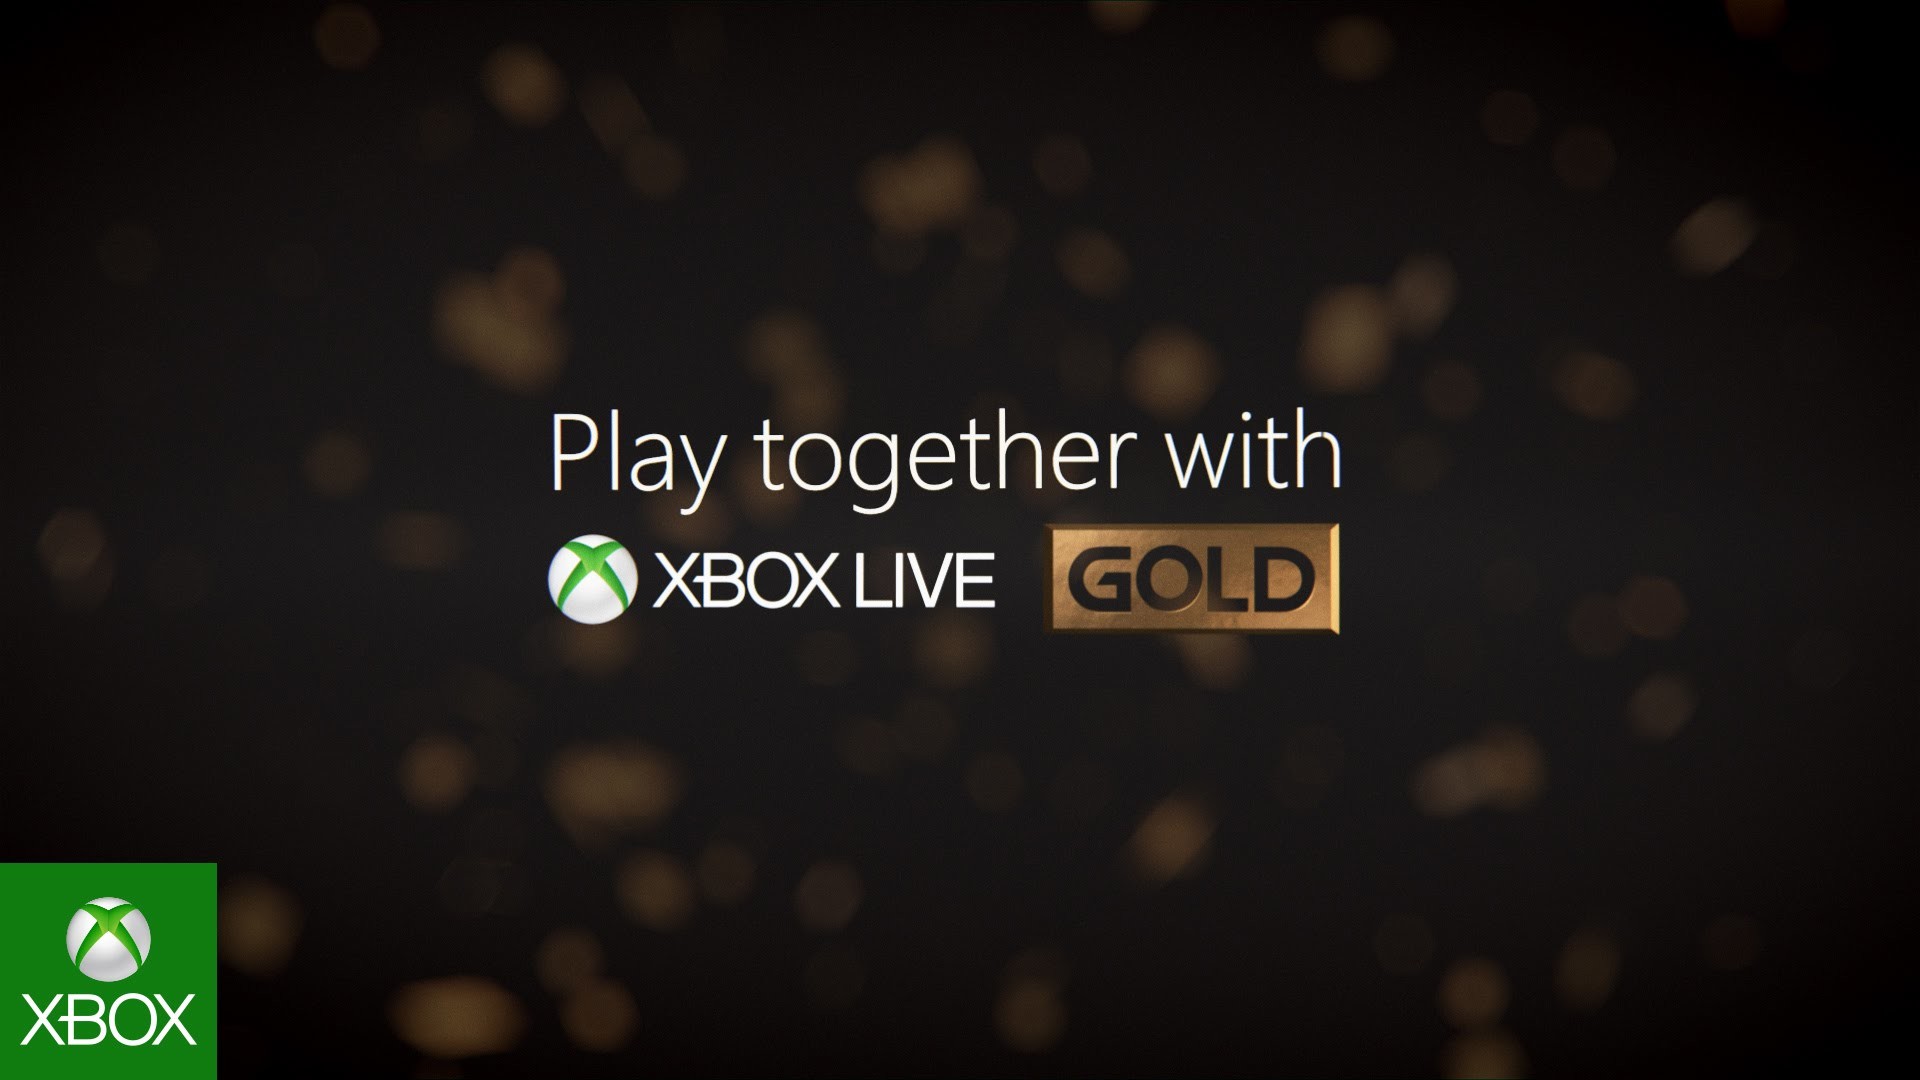 1920x1080 Play together with Xbox Live Gold